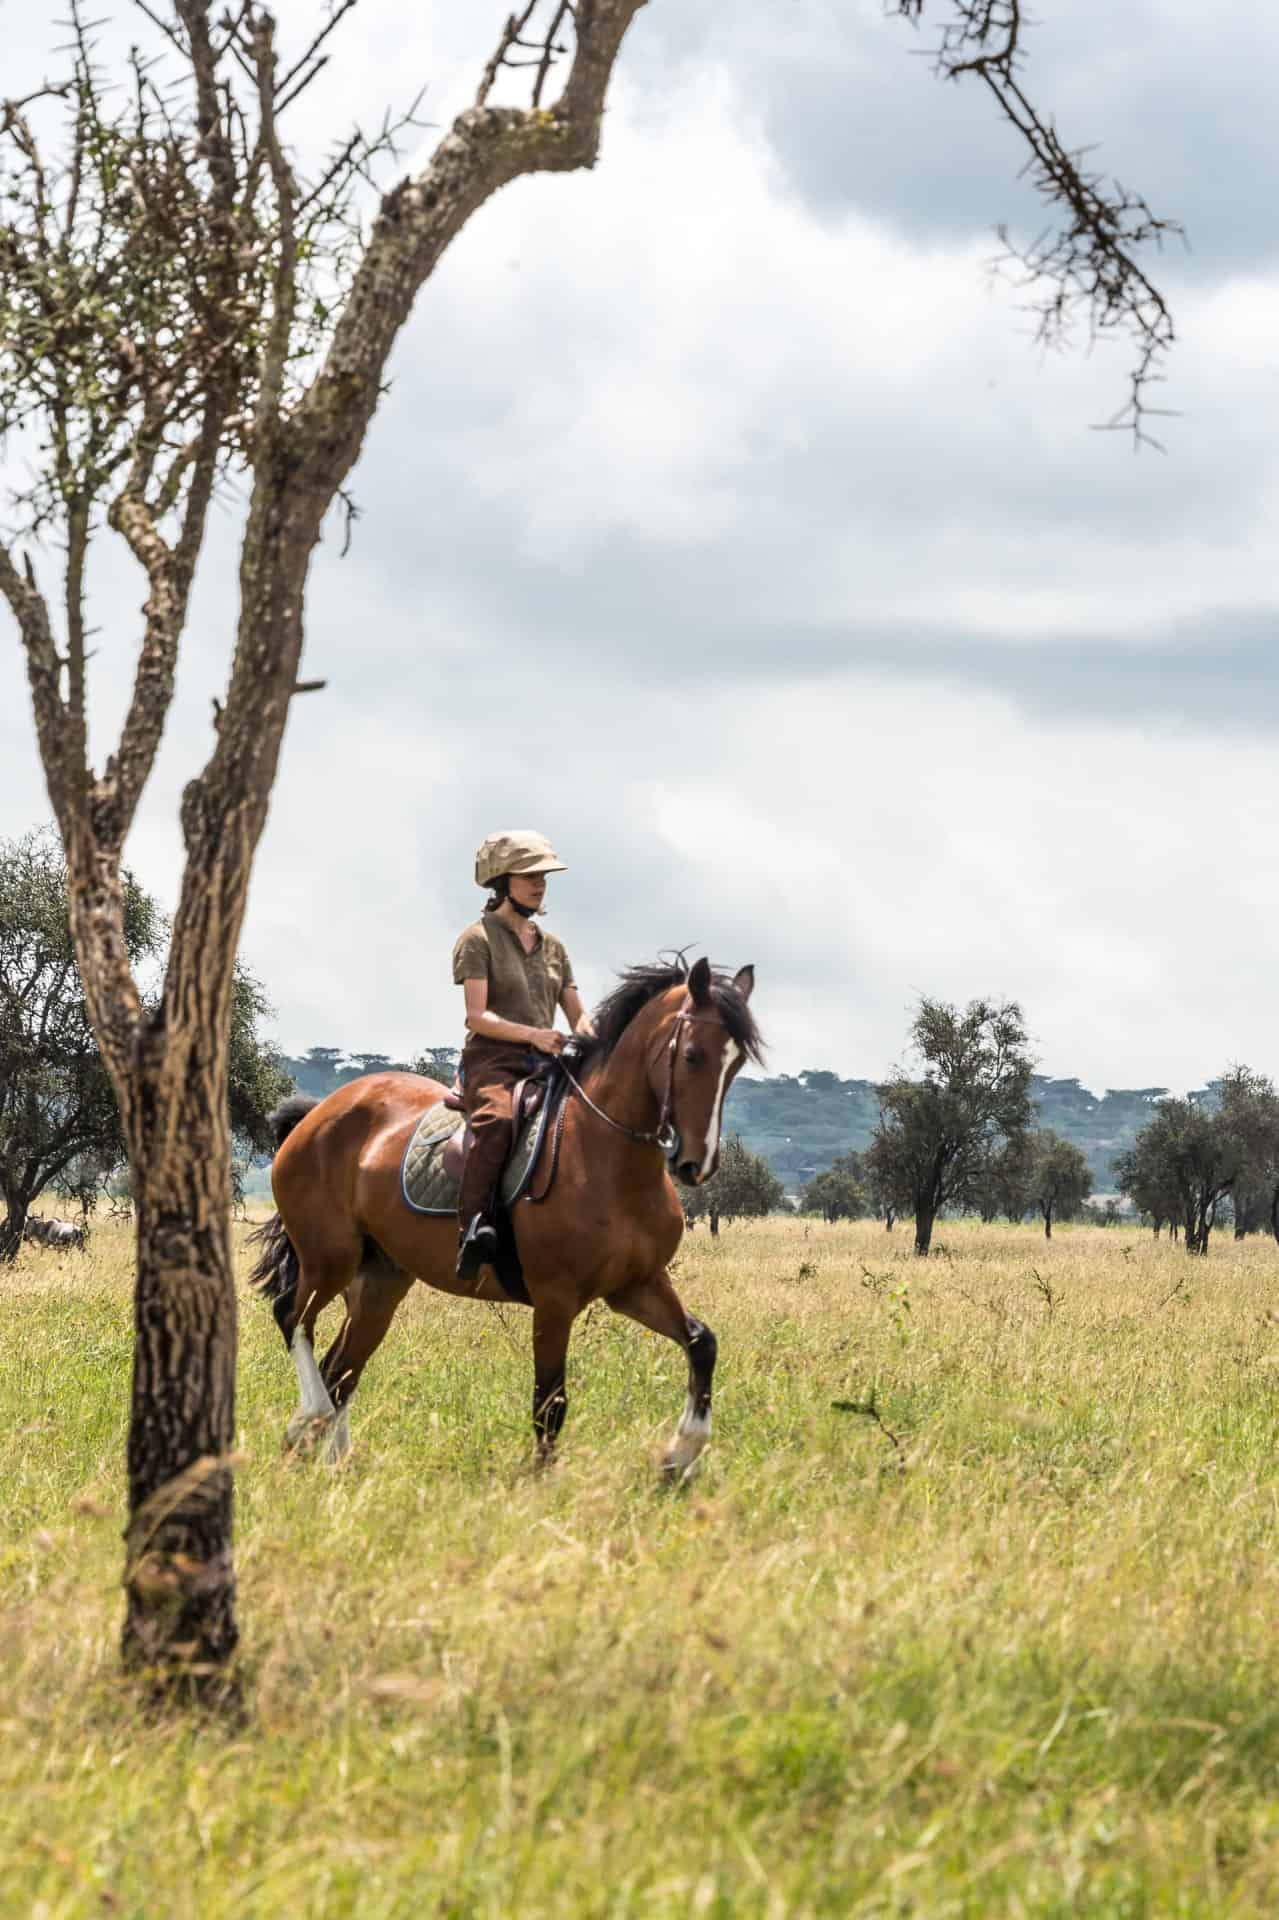 Step into our world by taking a look at some snapshots from our journeys through the Maasai Mara on horseback.